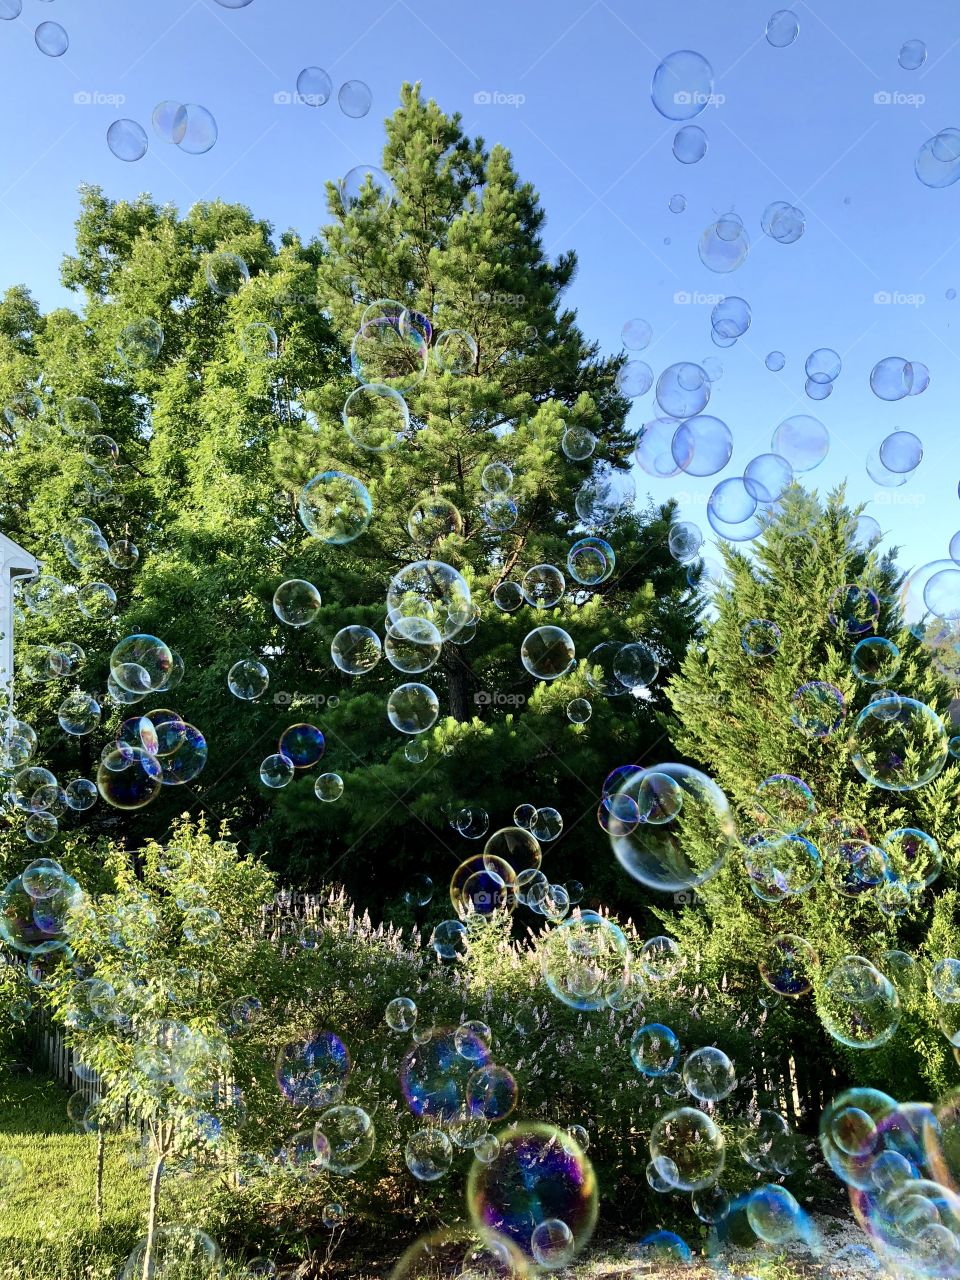 Bubbles in the wind